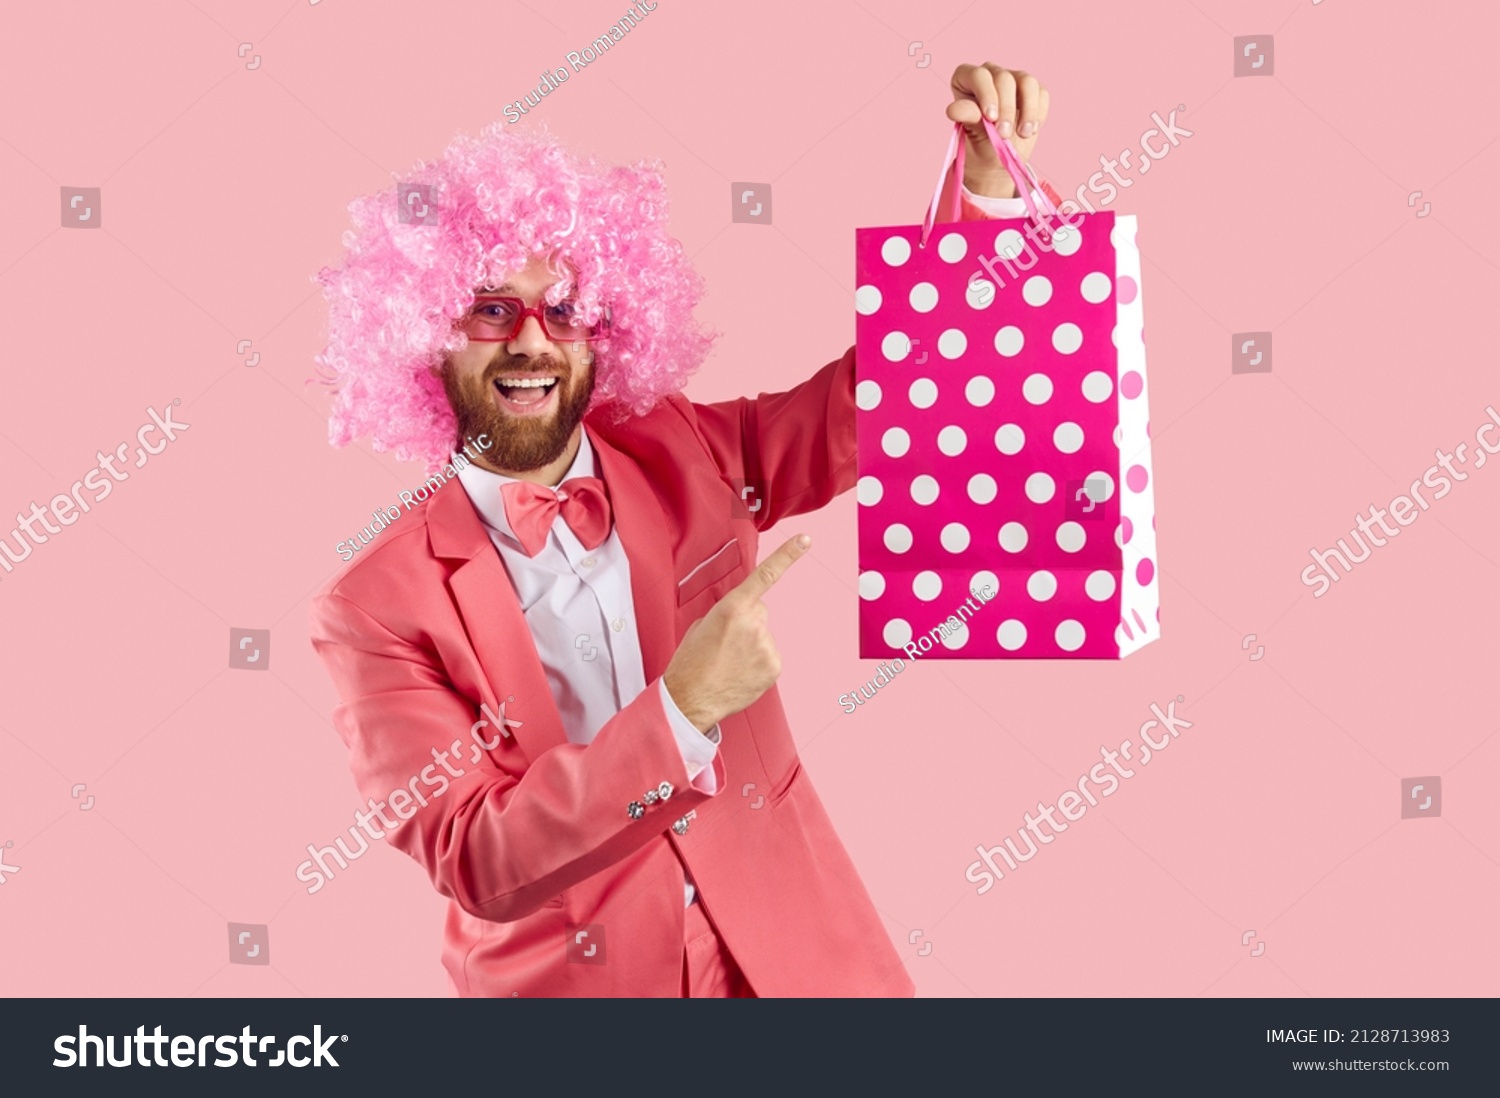 Funny crazy clown man in pink curly wig, sunglasses, funky suit and bow tie showing pink and white polka dot paper bag and smiling. Shopping, sale, presents, discounts, special offers concept #2128713983